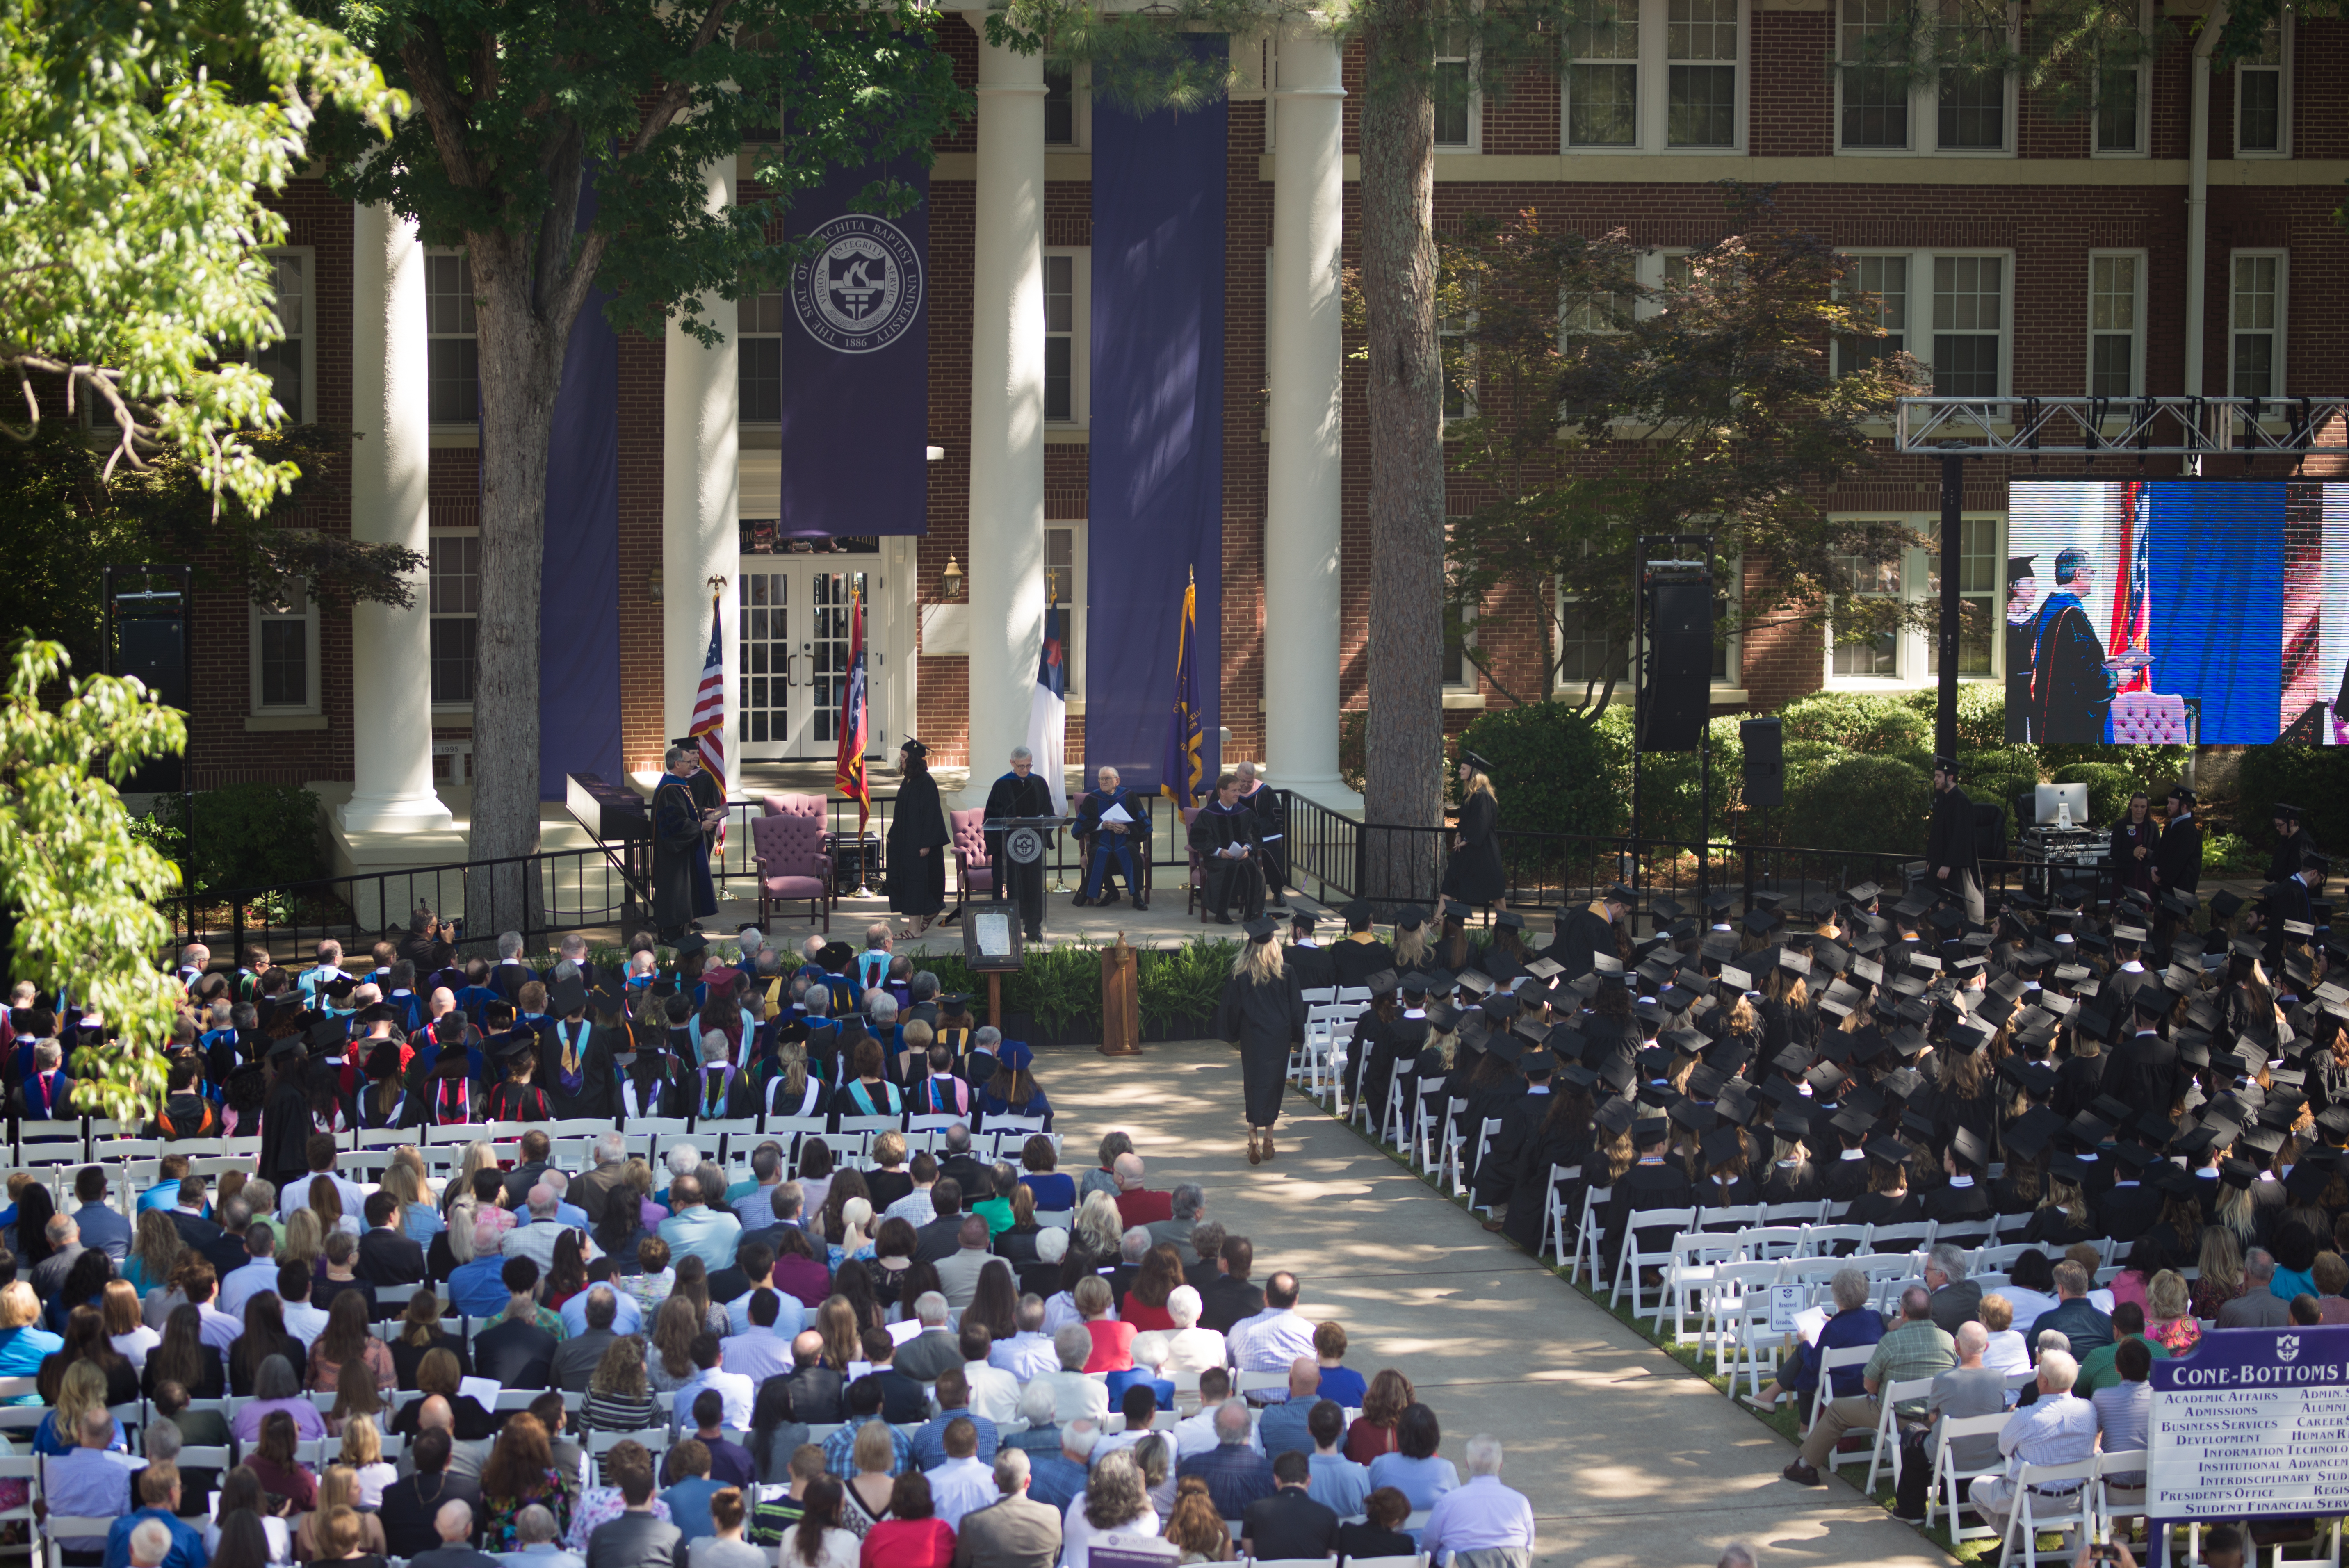 Ouachita to hold 131st spring commencement ceremony May 12.